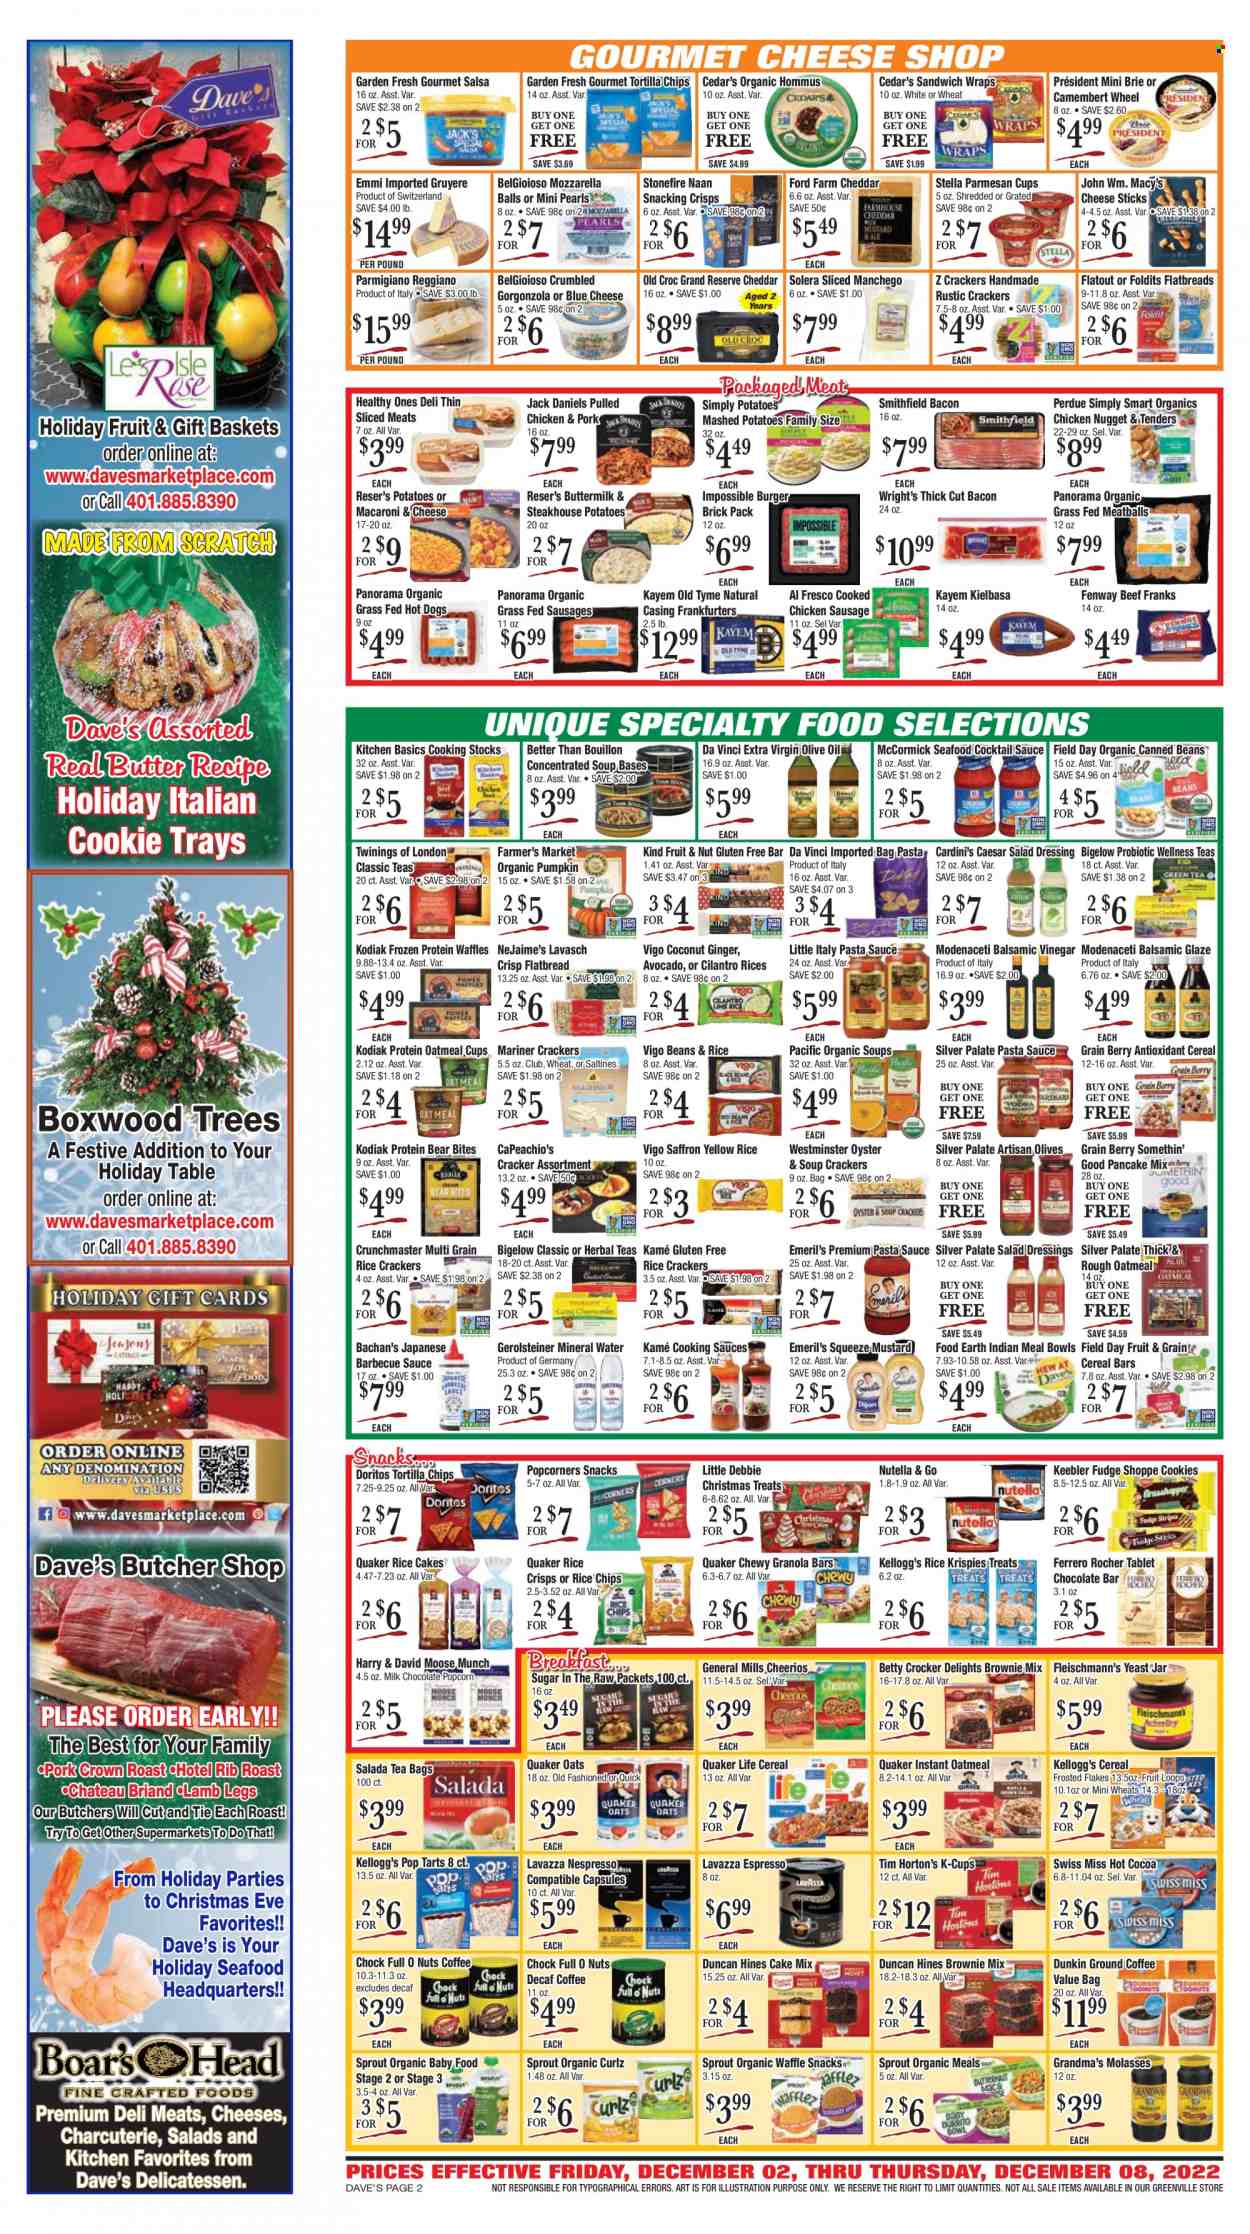 thumbnail - Dave's Fresh Marketplace Flyer - 12/02/2022 - 12/08/2022 - Sales products - flatbread, wraps, waffles, brownie mix, cake mix, ginger, avocado, coconut, oysters, seafood, macaroni & cheese, mashed potatoes, hot dog, Jack Daniel's, pasta sauce, meatballs, hamburger, pancakes, Quaker, Perdue®, pulled chicken, bacon, sausage, chicken sausage, kielbasa, hummus, camembert, Gruyere, Manchego, parmesan, brie, Parmigiano Reggiano, Président, Swiss Miss, buttermilk, yeast, cheese sticks, cookies, fudge, milk chocolate, Nutella, snack, Ferrero Rocher, cereal bar, crackers, Kellogg's, Pop-Tarts, Keebler, chocolate bar, Doritos, tortilla chips, popcorn, rice crackers, saltines, rice crisps, bouillon, oatmeal, oats, olives, cereals, Cheerios, granola bar, Rice Krispies, Frosted Flakes, cilantro, balsamic glaze, BBQ sauce, cocktail sauce, mustard, salad dressing, dressing, salsa, balsamic vinegar, extra virgin olive oil, olive oil, oil, molasses, mineral water, hot cocoa, tea bags, Twinings, coffee, Nespresso, ground coffee, coffee capsules, K-Cups, Lavazza, organic baby food. Page 2.